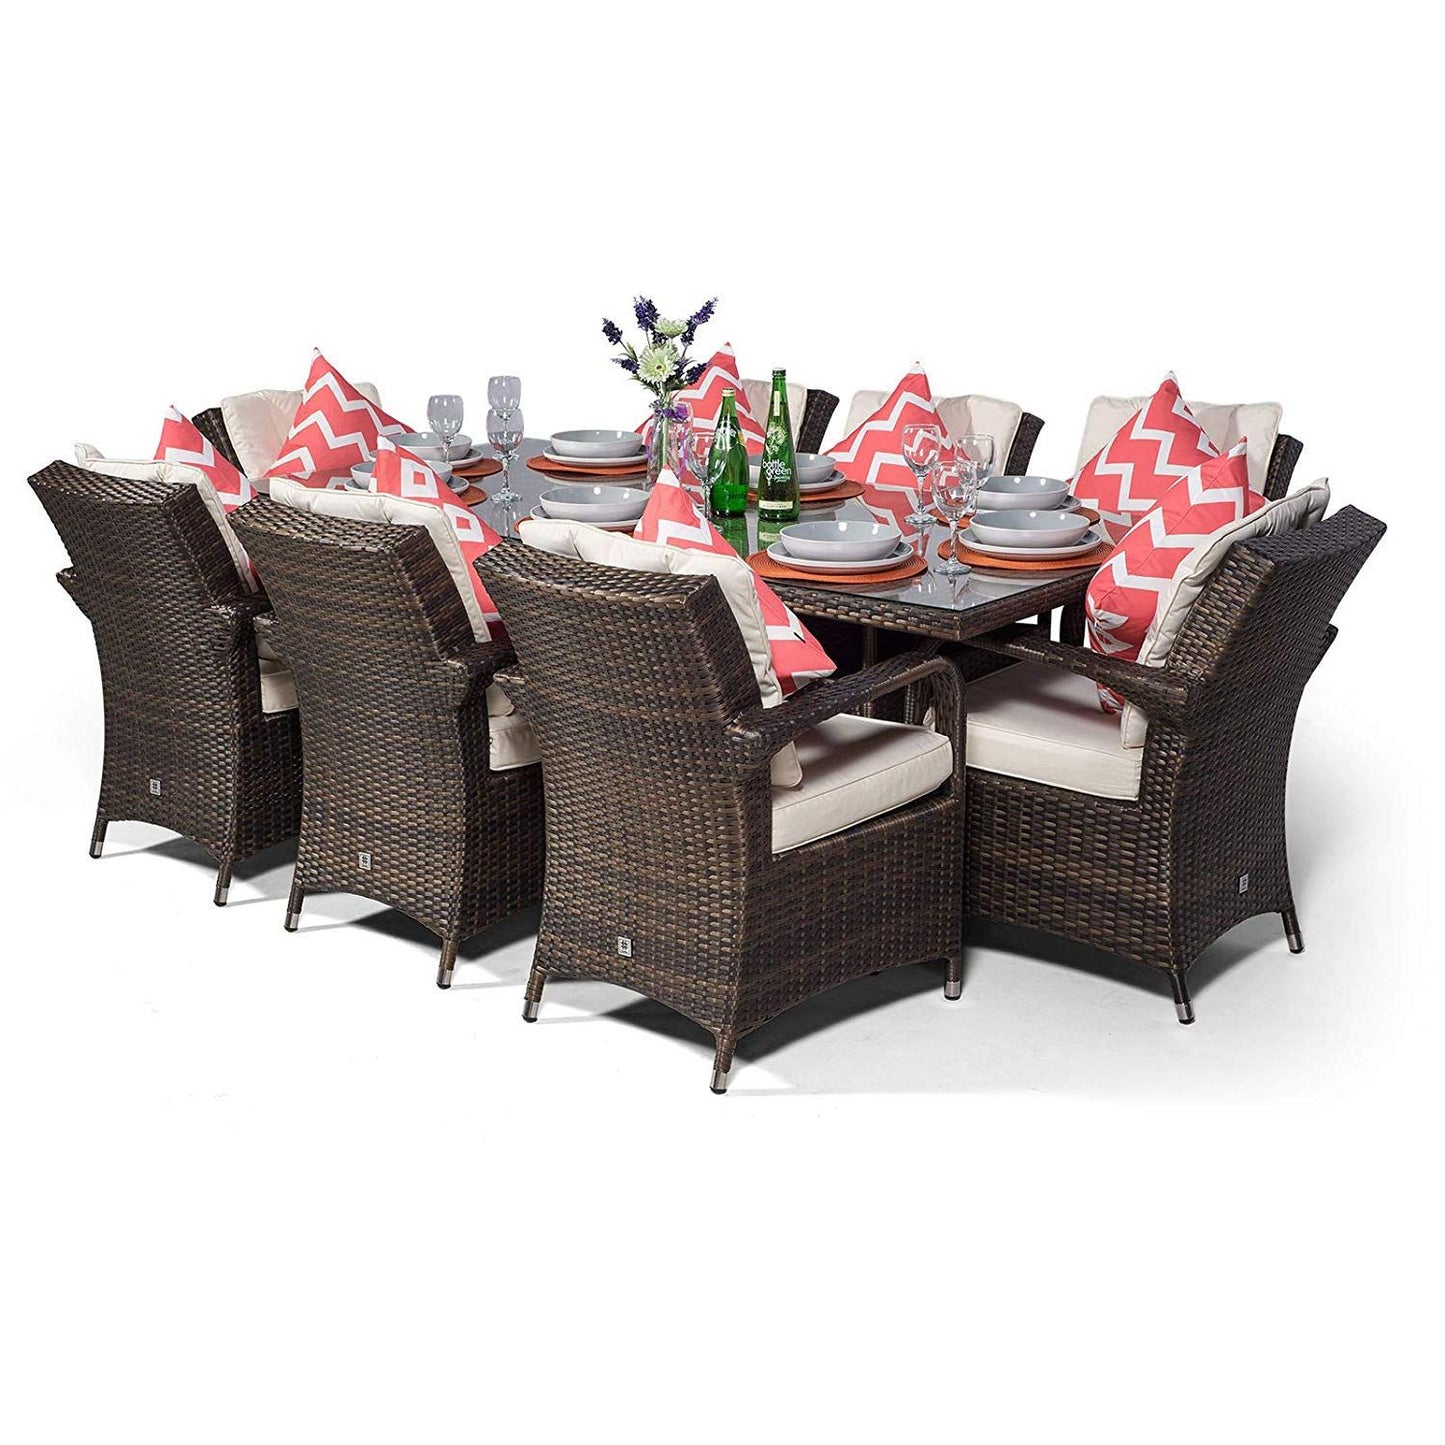 Ottawa - 8 Seat Set with Rectangular Table & Ice Bucket (Brown with Cream Cushions)